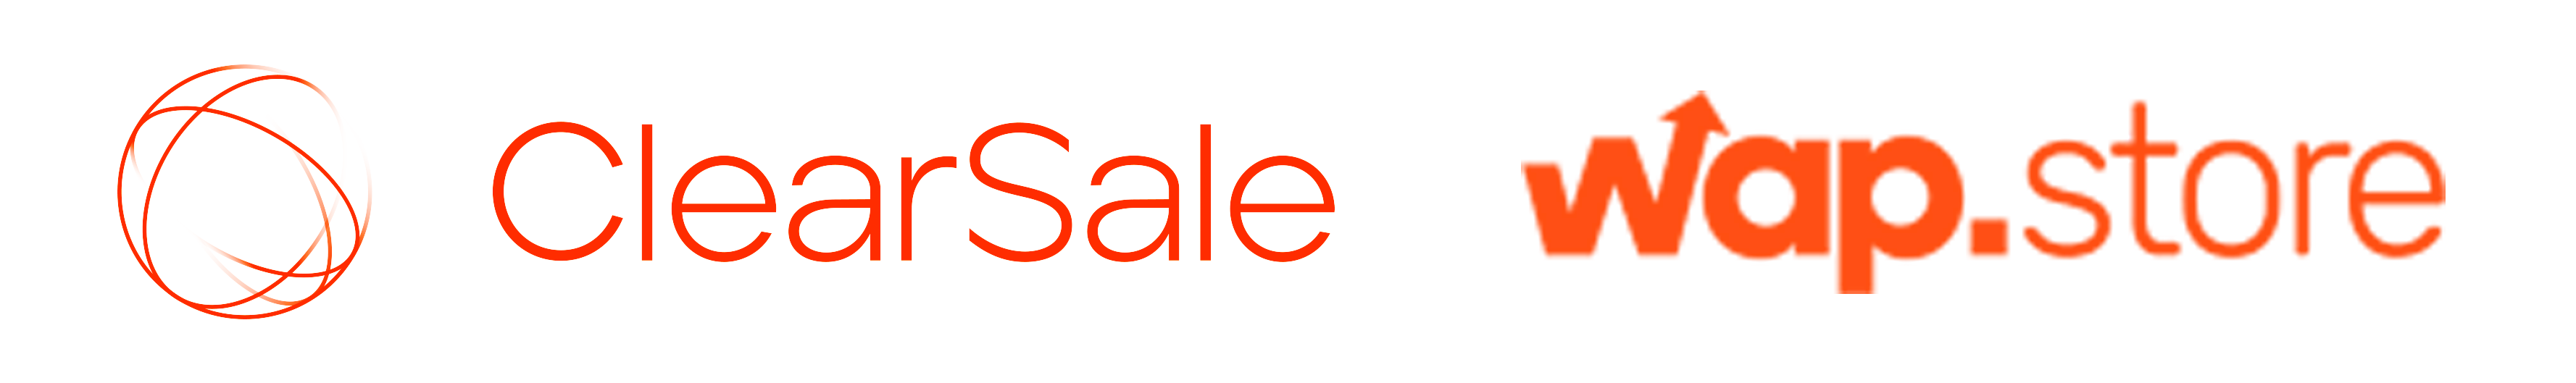 ClearSale